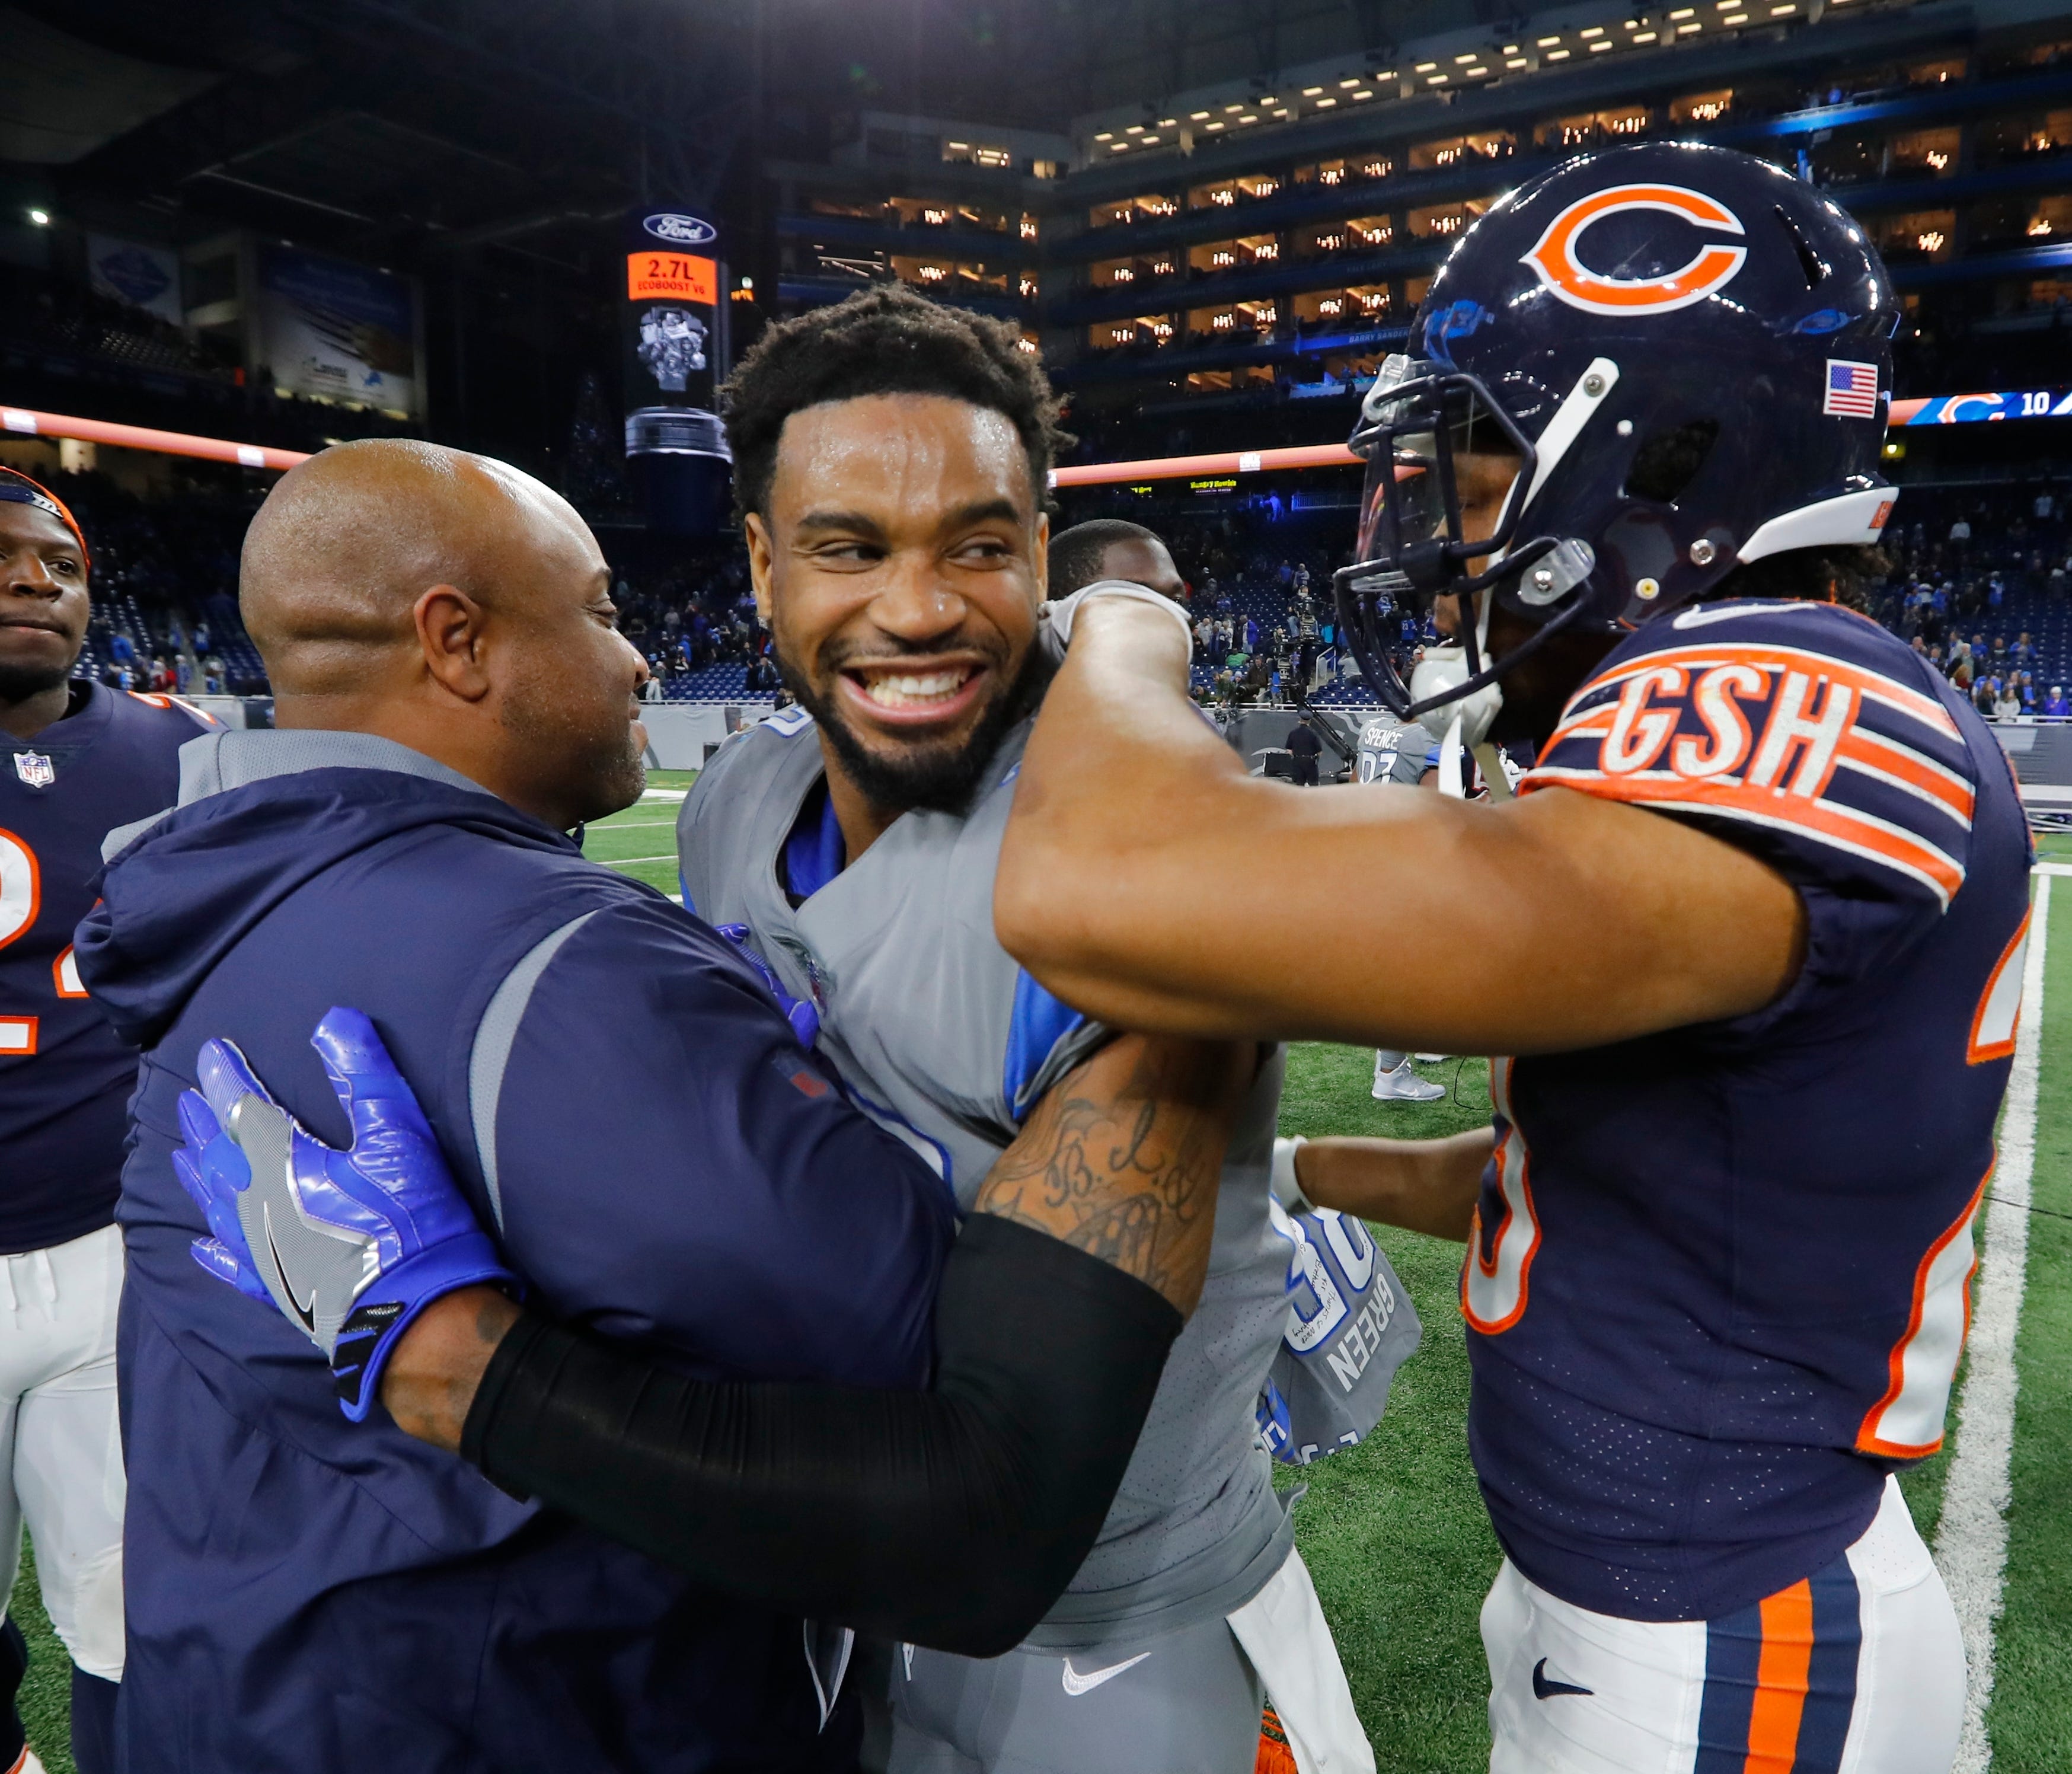 Detroit Lions cornerback Darius Slay (23) is greeted by Chicago Bears cornerback Kyle Fuller, right, after an NFL football game, Saturday, Dec. 16, 2017, in Detroit. (AP Photo/Paul Sancya)